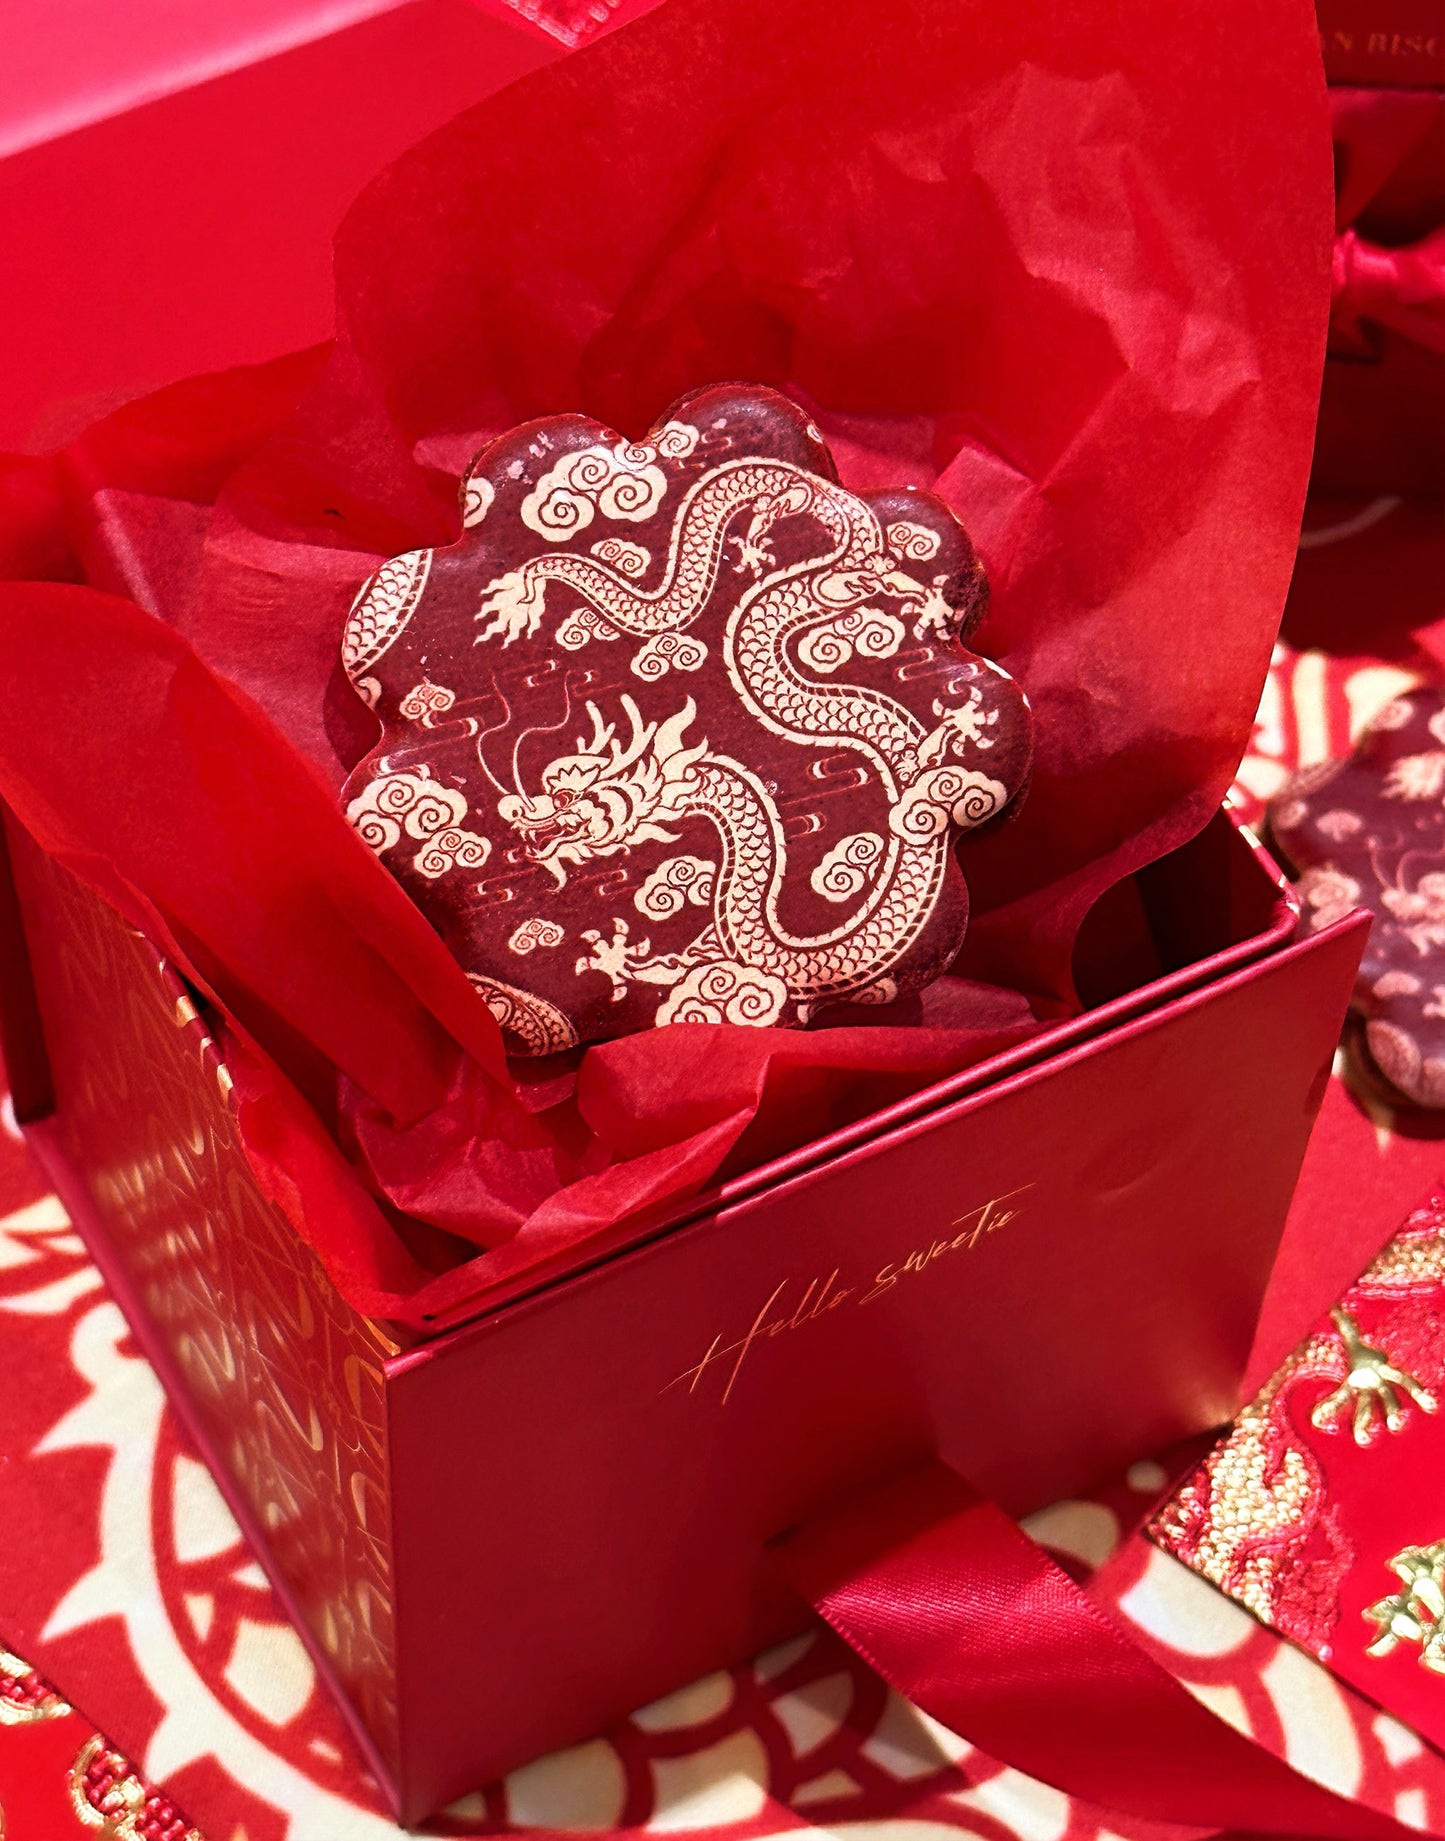 YDR1 - Year of the Dragon Speculoos biscuits with Forever Roses and Red envelope